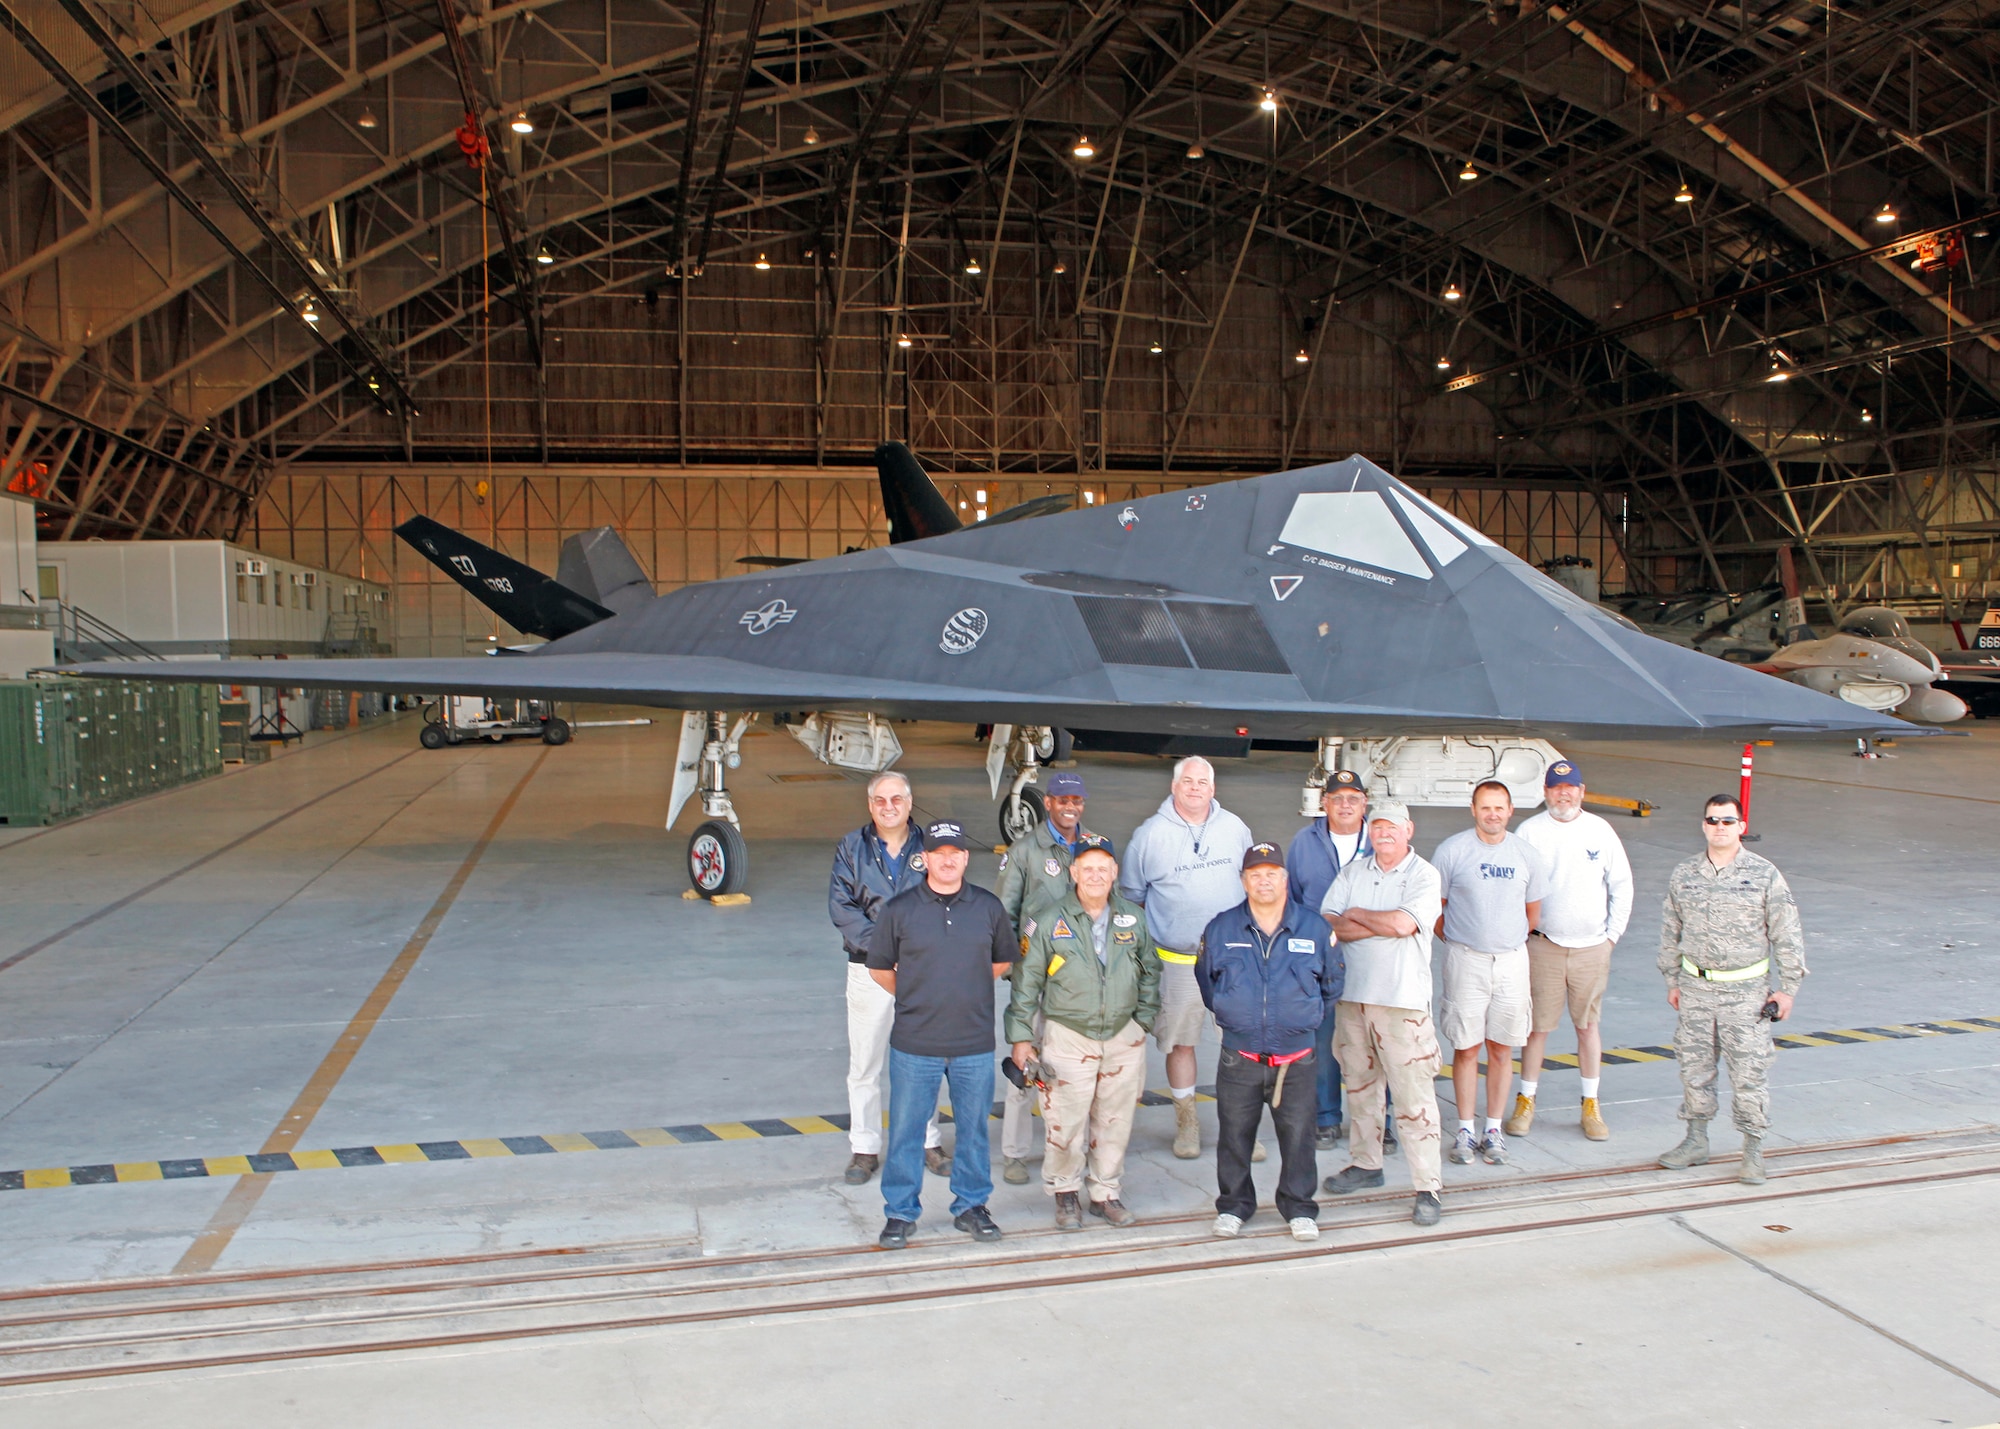 Members of the Air Force Flight Test Center Museum along with volunteers pose with one of the last F-117s left in the United States Air Force inventory June 8.  Tail number 783 was transported to Edwards from the AFFTC's Blackbird Air Park in Palmdale, Calif. The stealth aircraft will be refurbished and put on display in the future.  (U.S. Air Force photo by Jet Fabara)